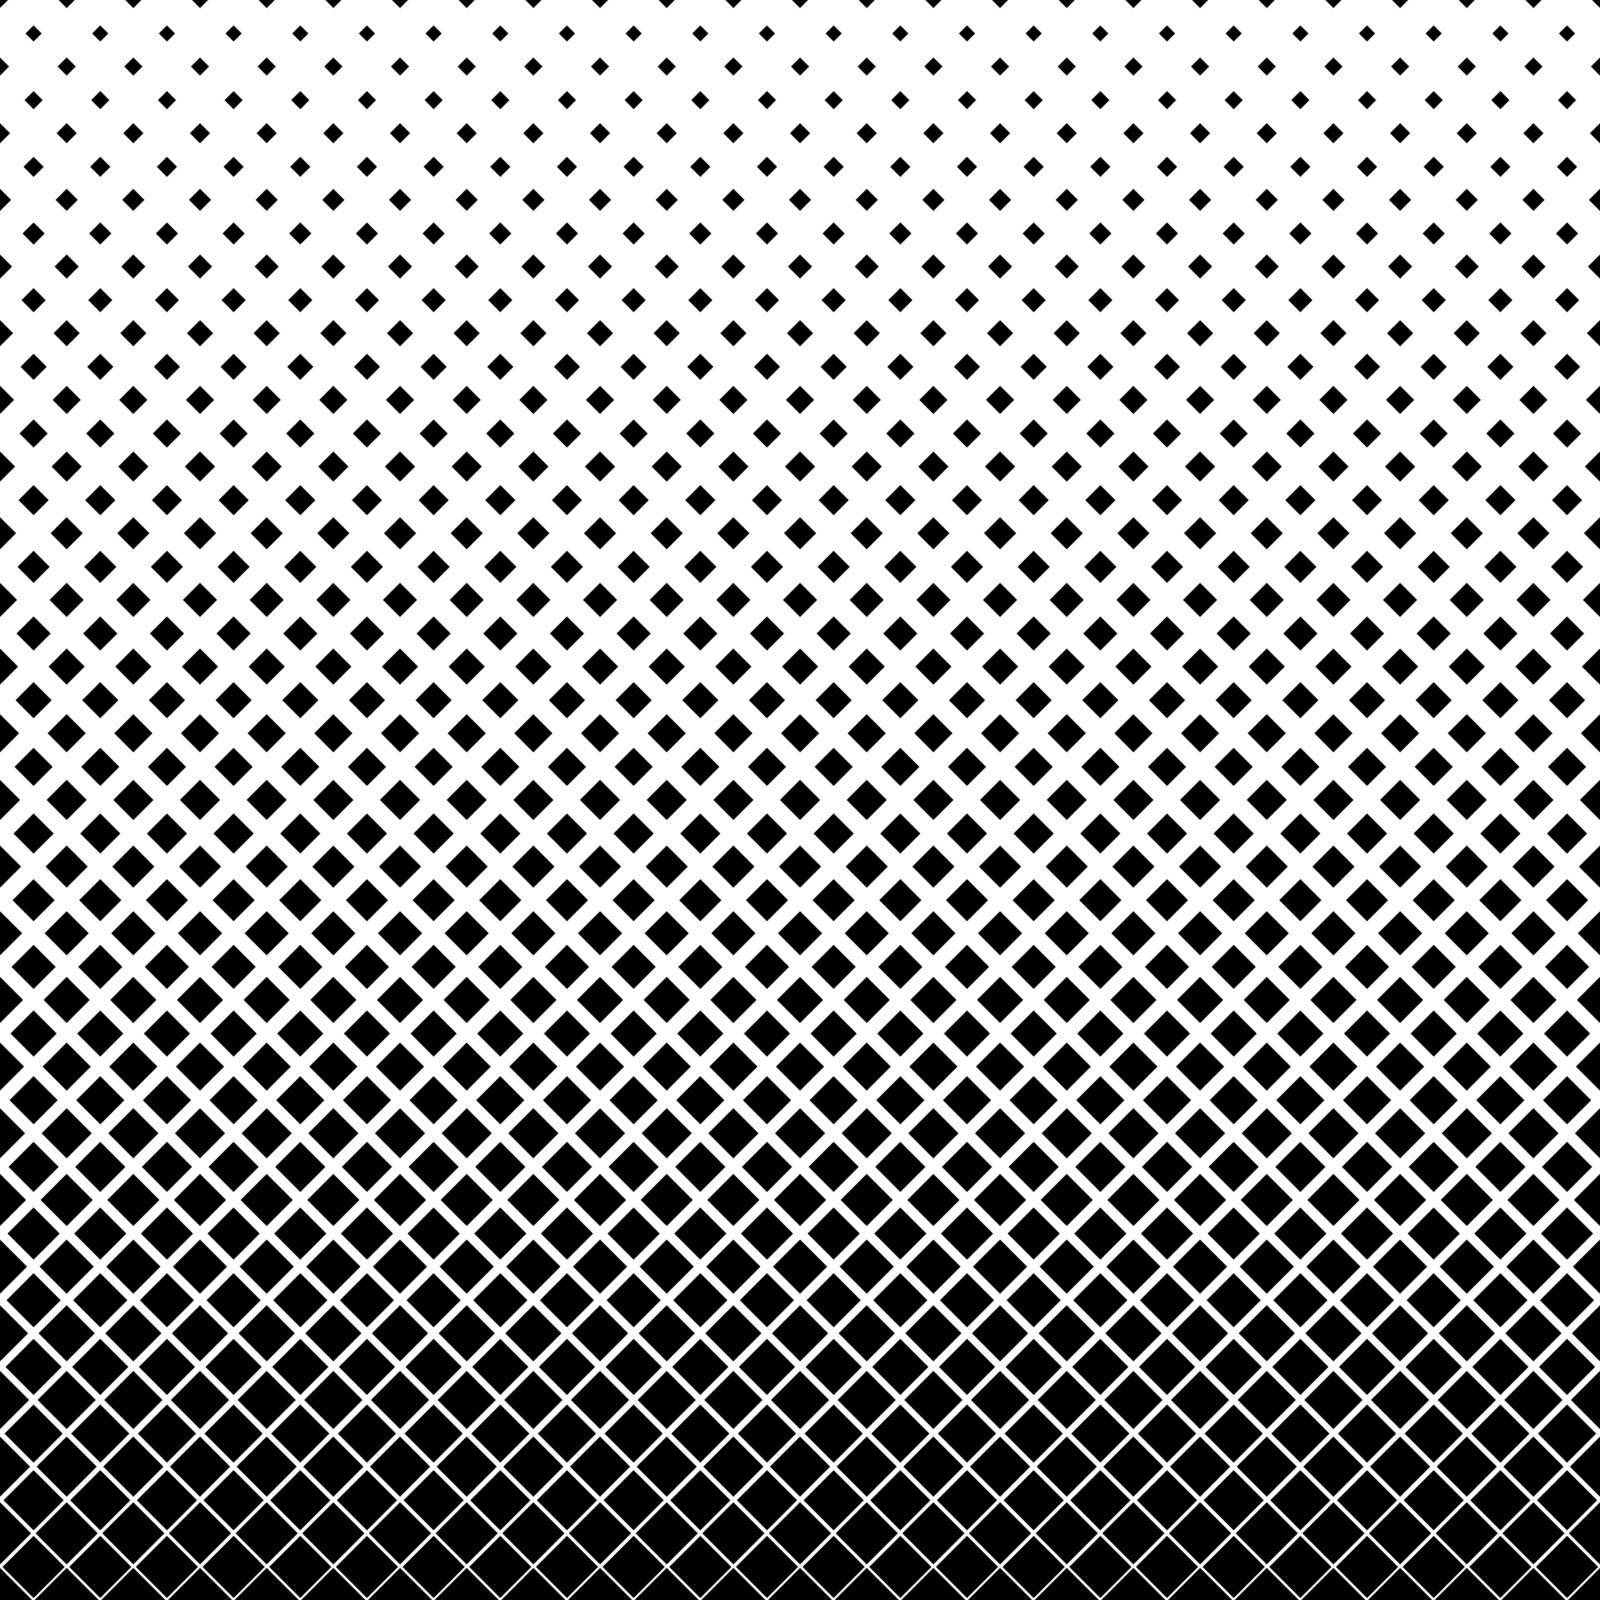 Geometric halftone pattern of black squares on a transparent background. Vector illustration. EPS 10 by TopRated